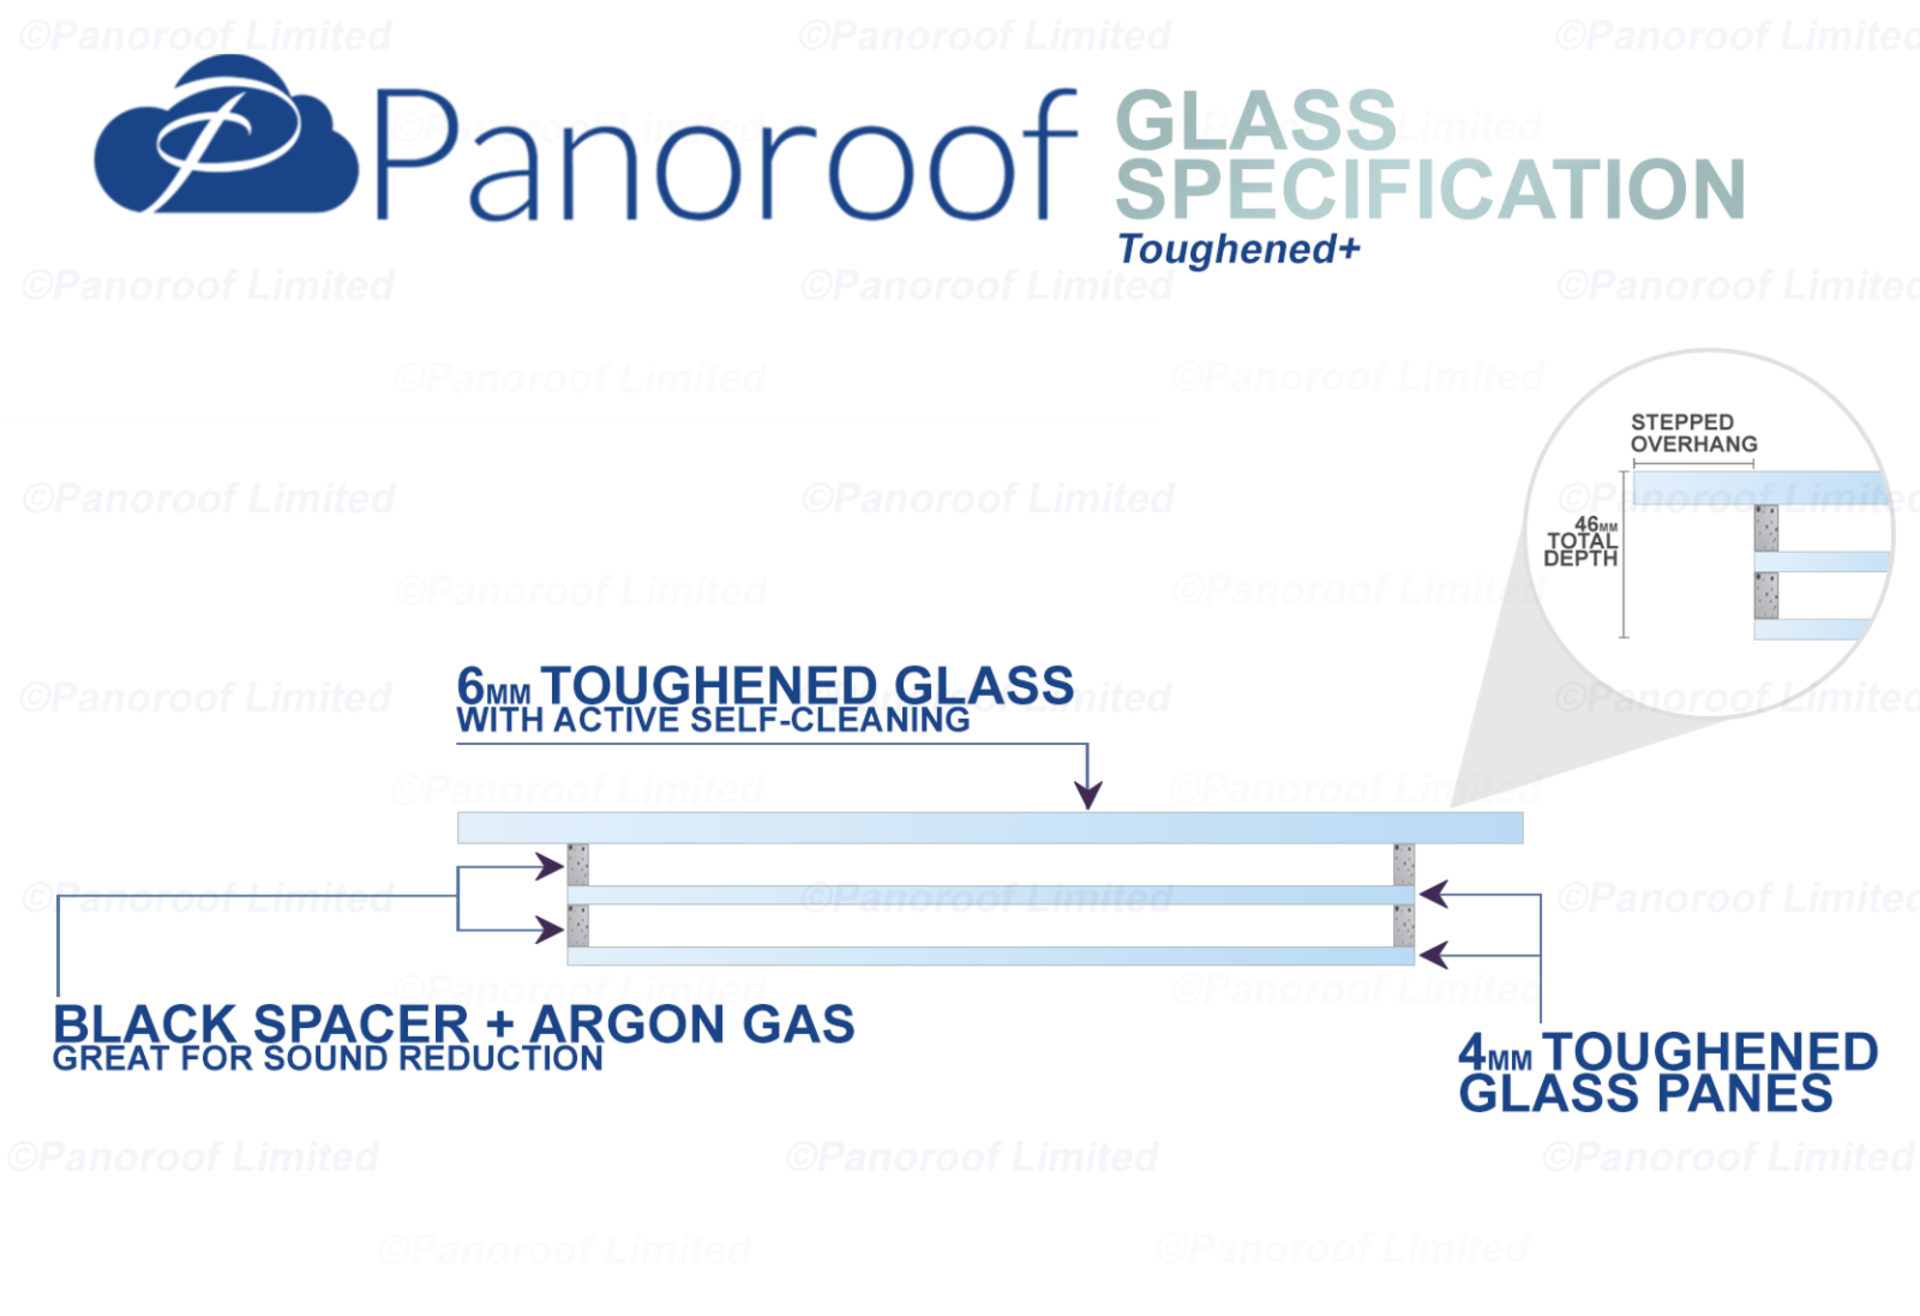 """Panoroof Triple Glazed Self Cleaning 800x2500mm (inside Size Visable glass area) Seamless Glass - Image 4 of 6